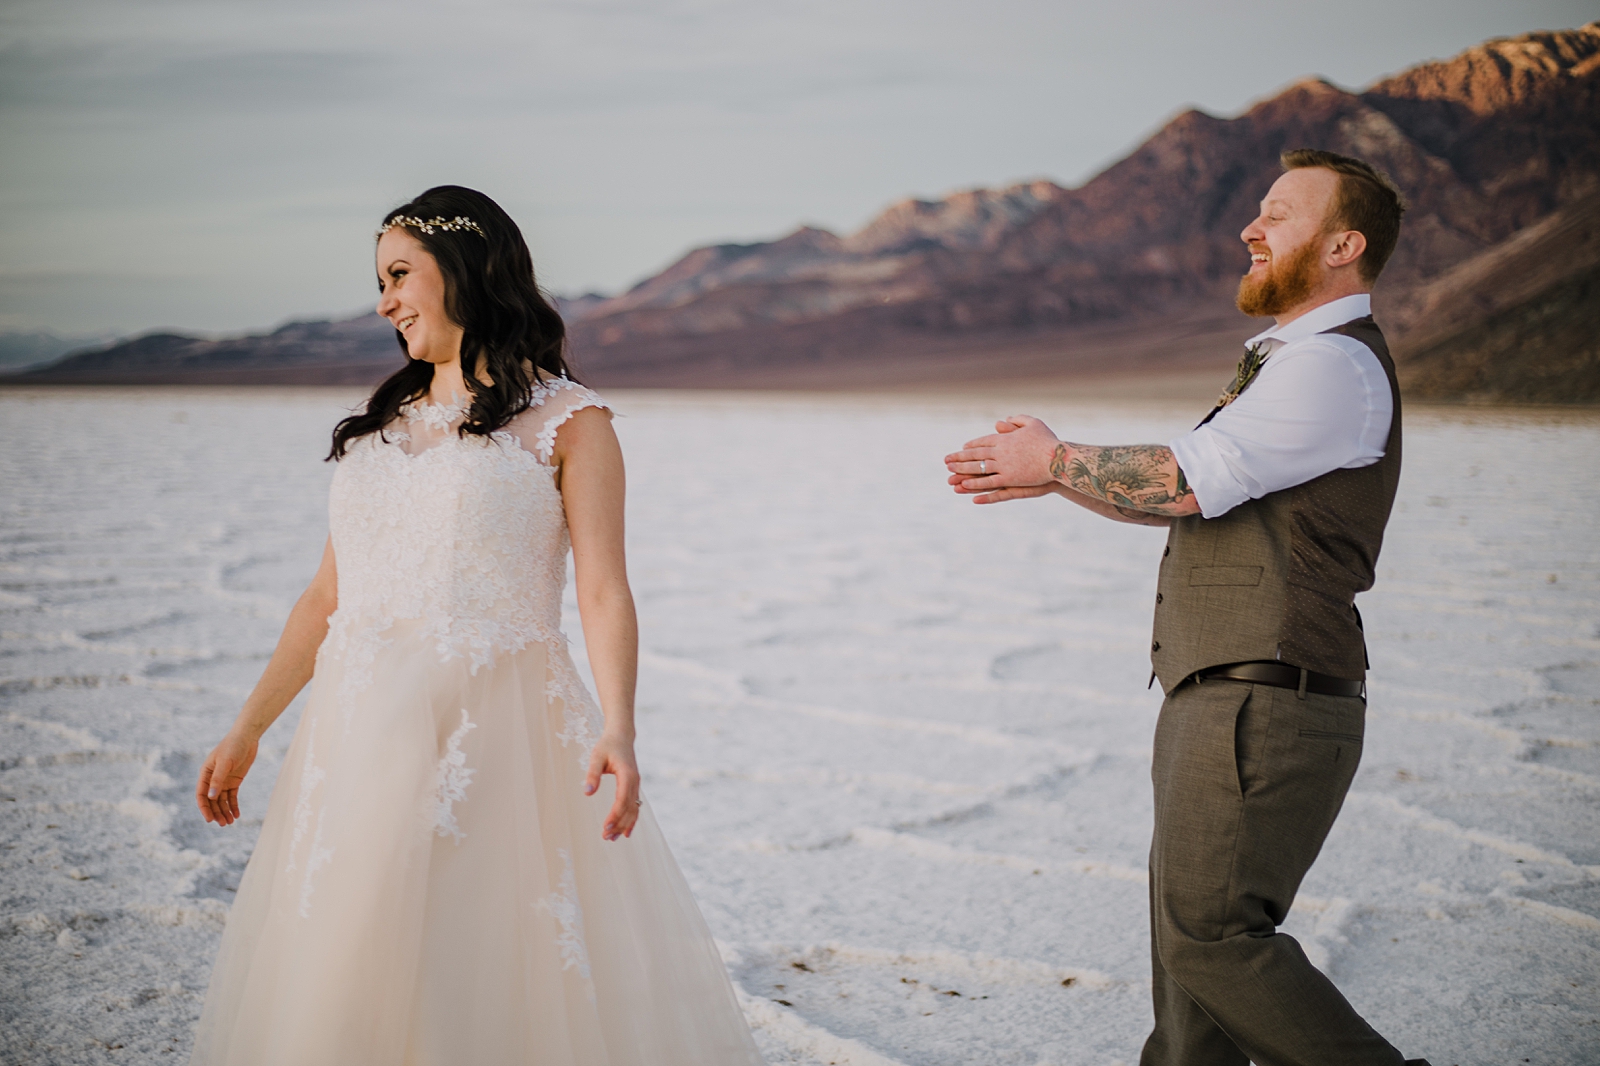 playing on the salt flats, death valley national park elopement, elope in death valley, badwater basin elopement, hiking in death valley national park, sunset at badwater basin